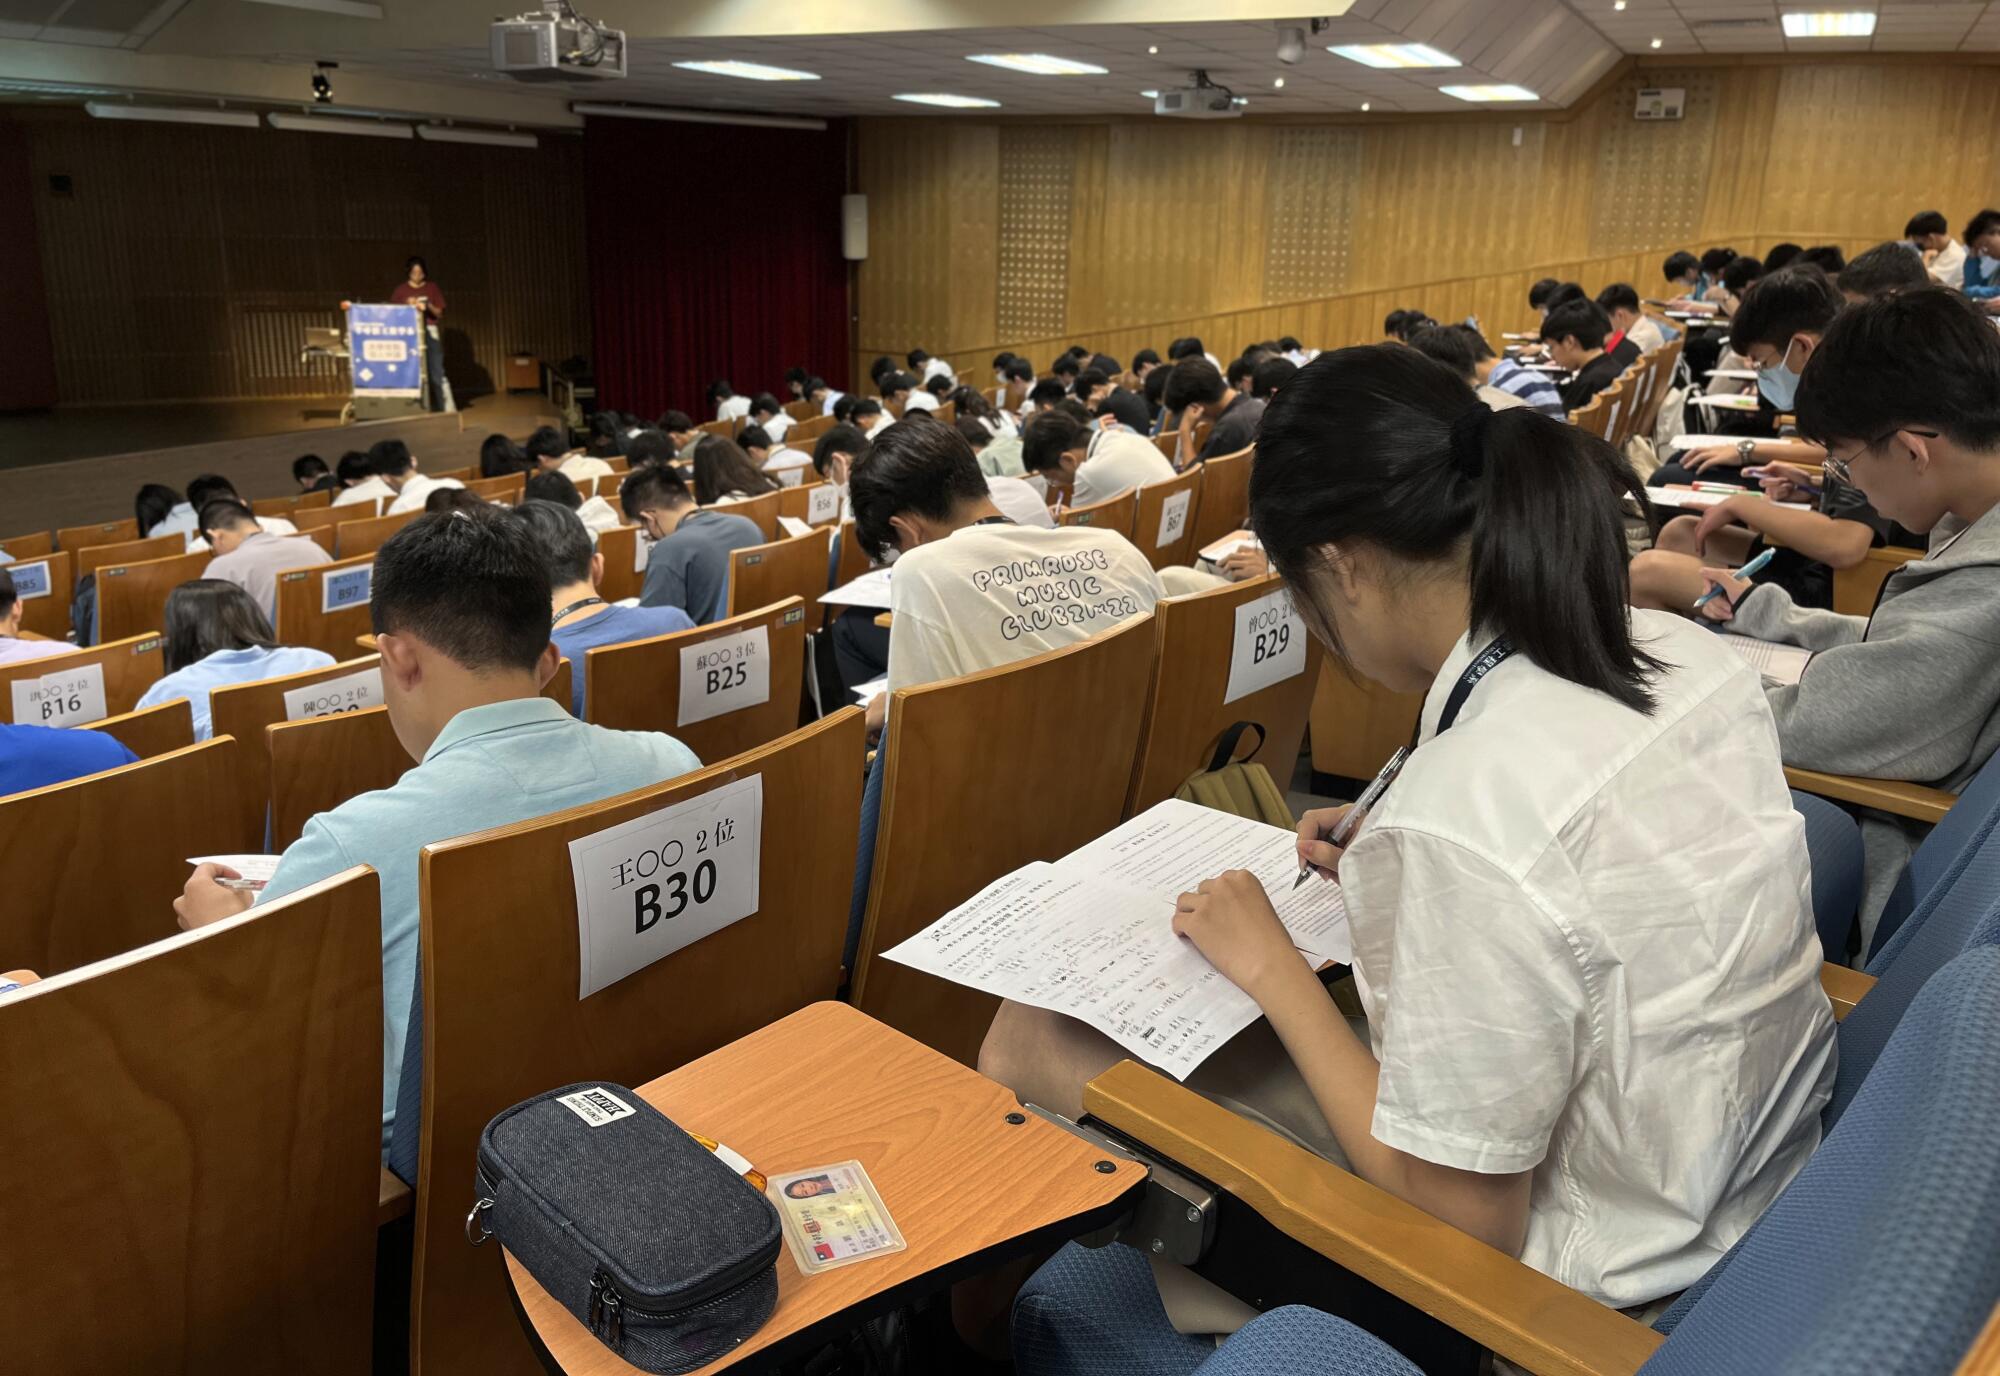 Students taking notes while seated in an auditorium